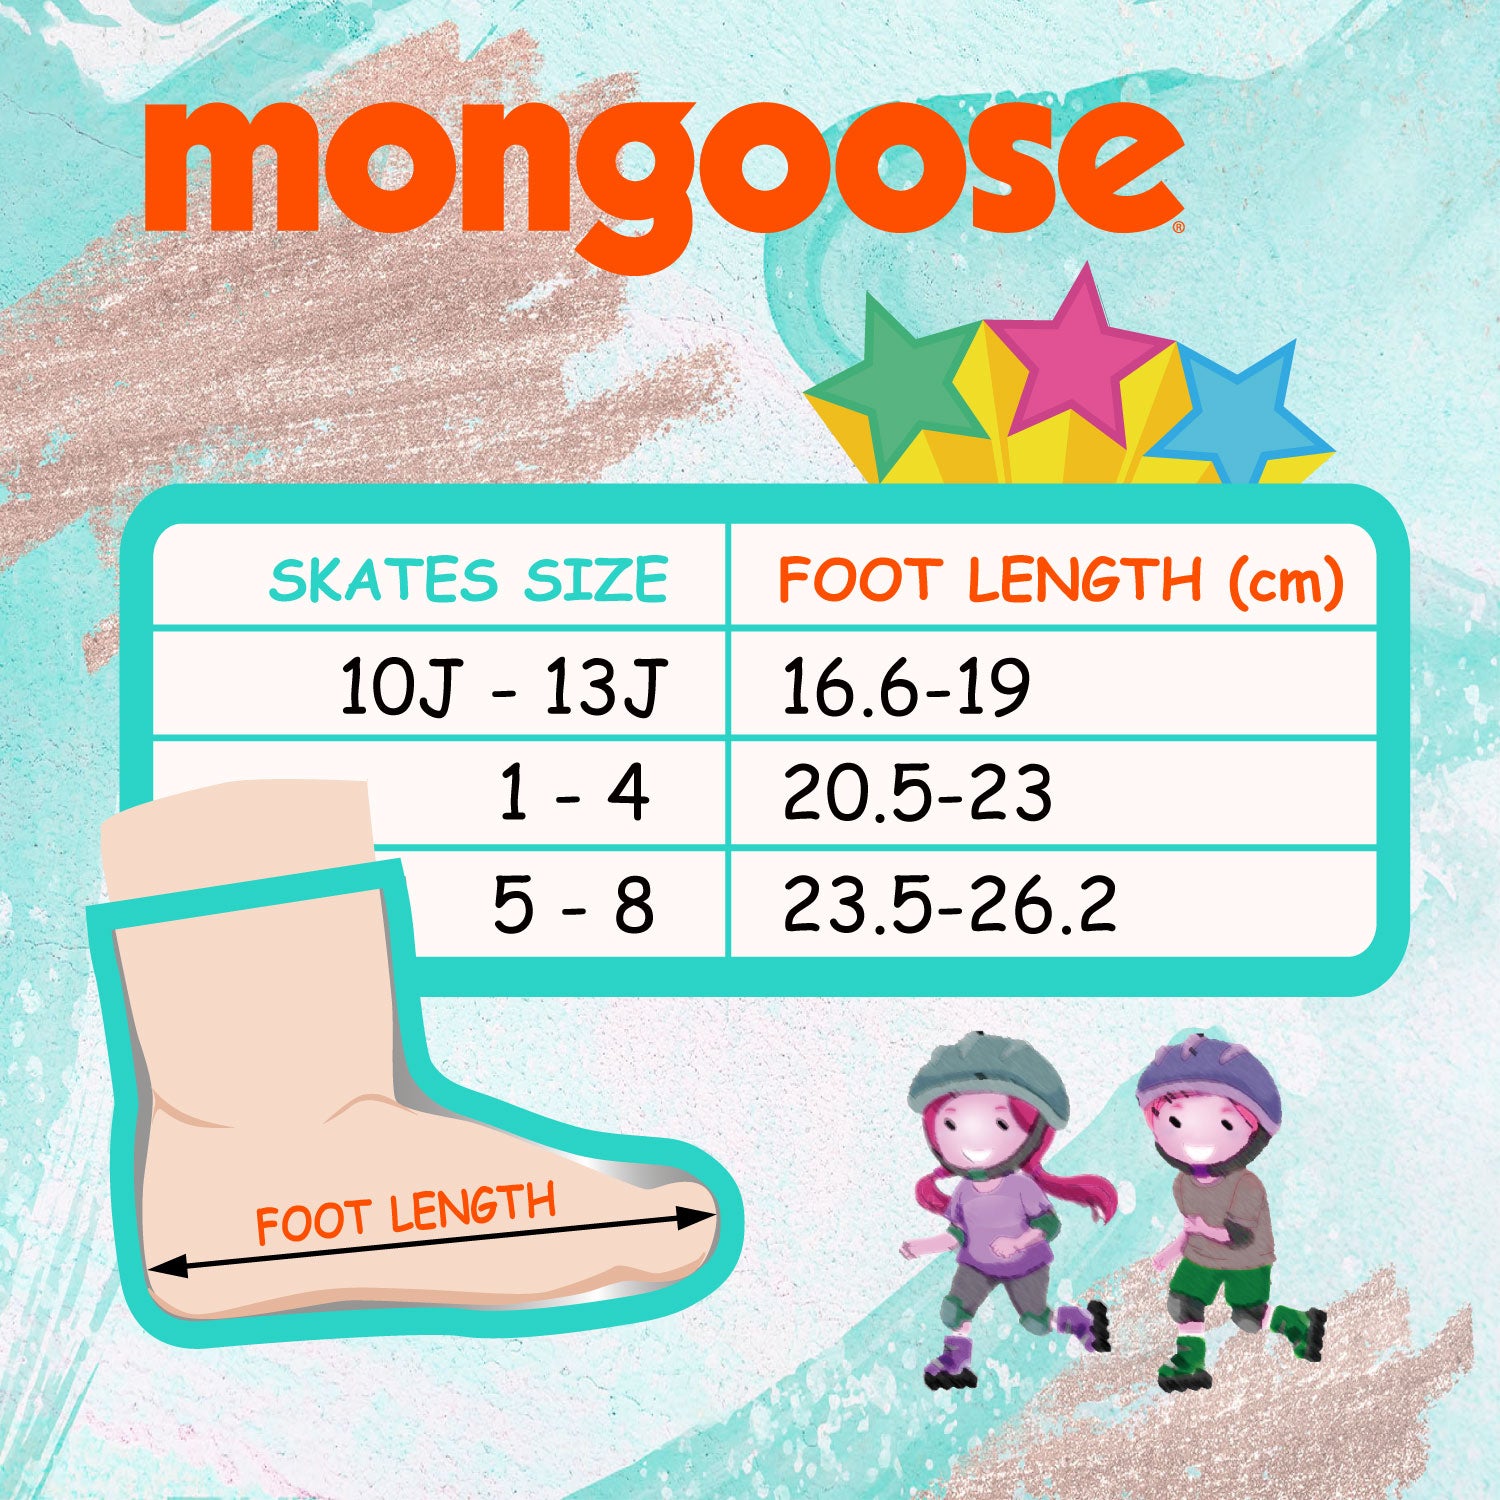 Mongoose Kids Roller Skates.  Adjustable youth sizes 1-4 for Boys or Girls.  LED Light Up Quad Skate Wheels to add more fun to childrens skating. - Pro-Distributing